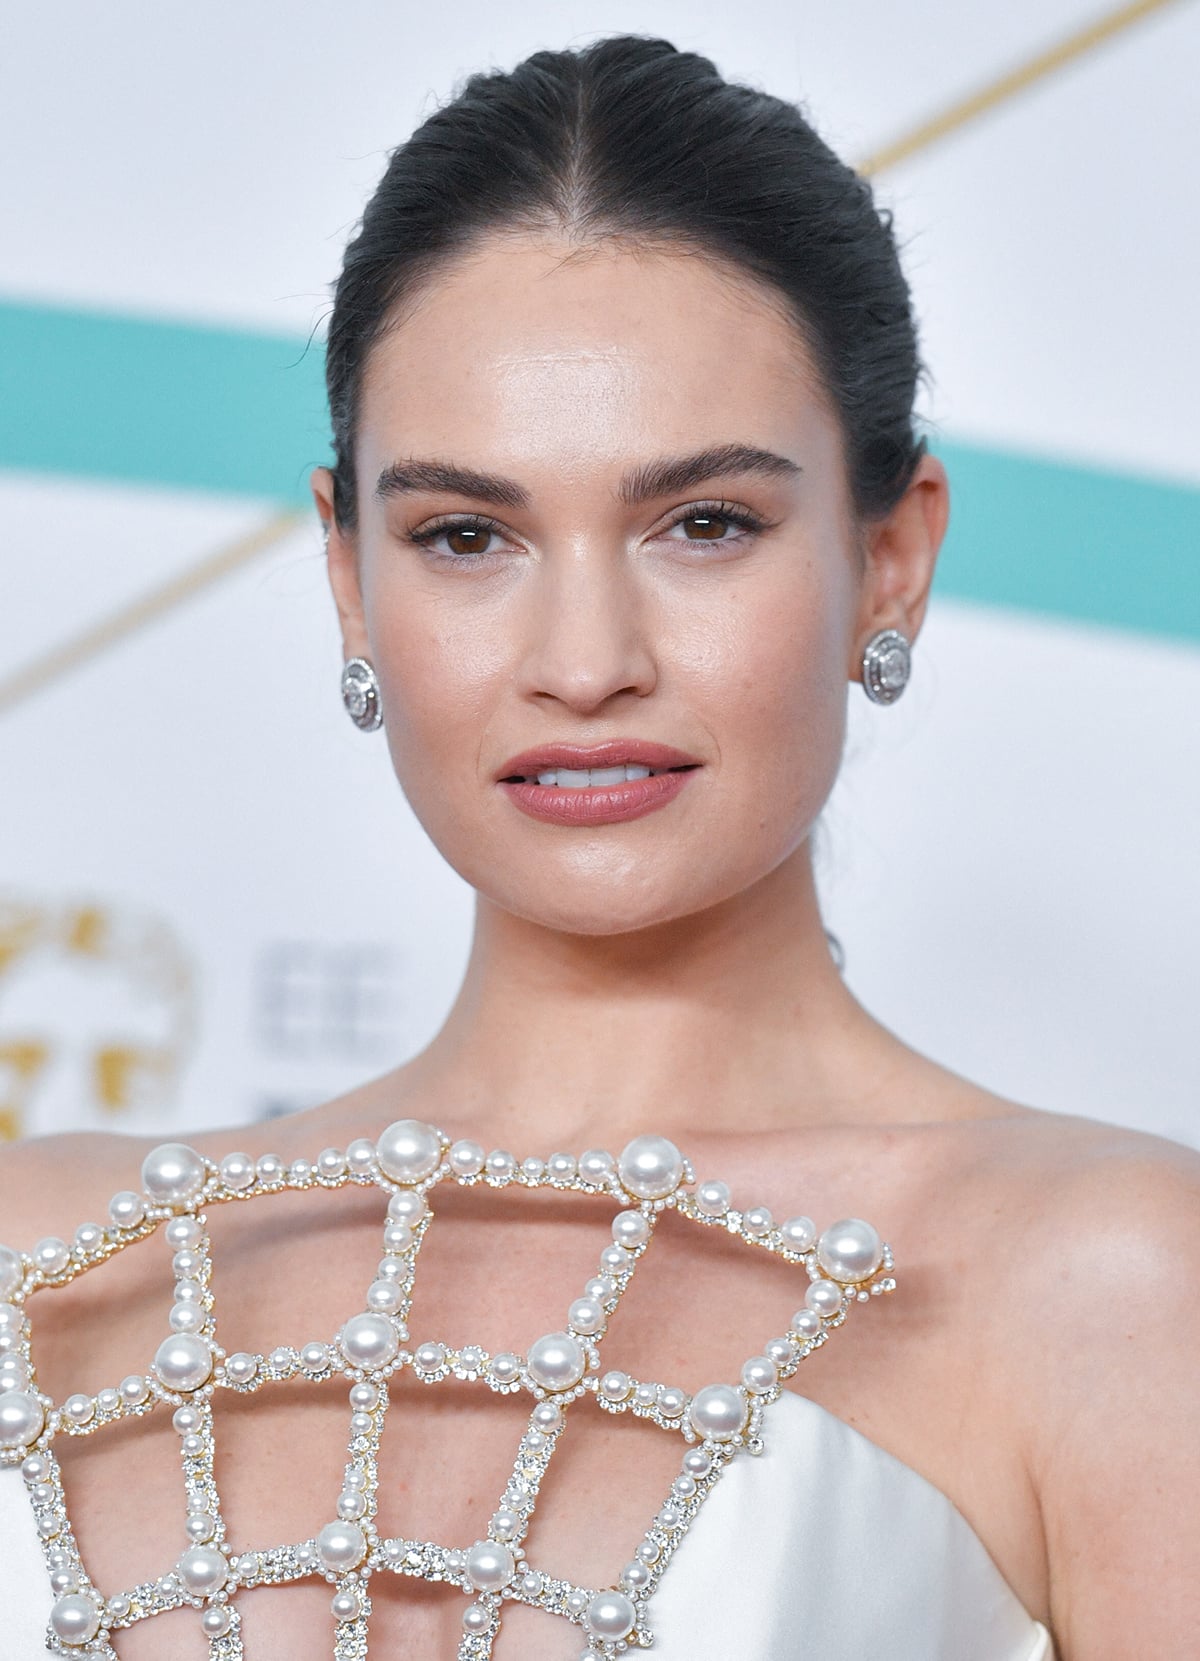 Lily James looks glowing with Charlotte Tilbury makeup and with her tresses in a sophisticated bun